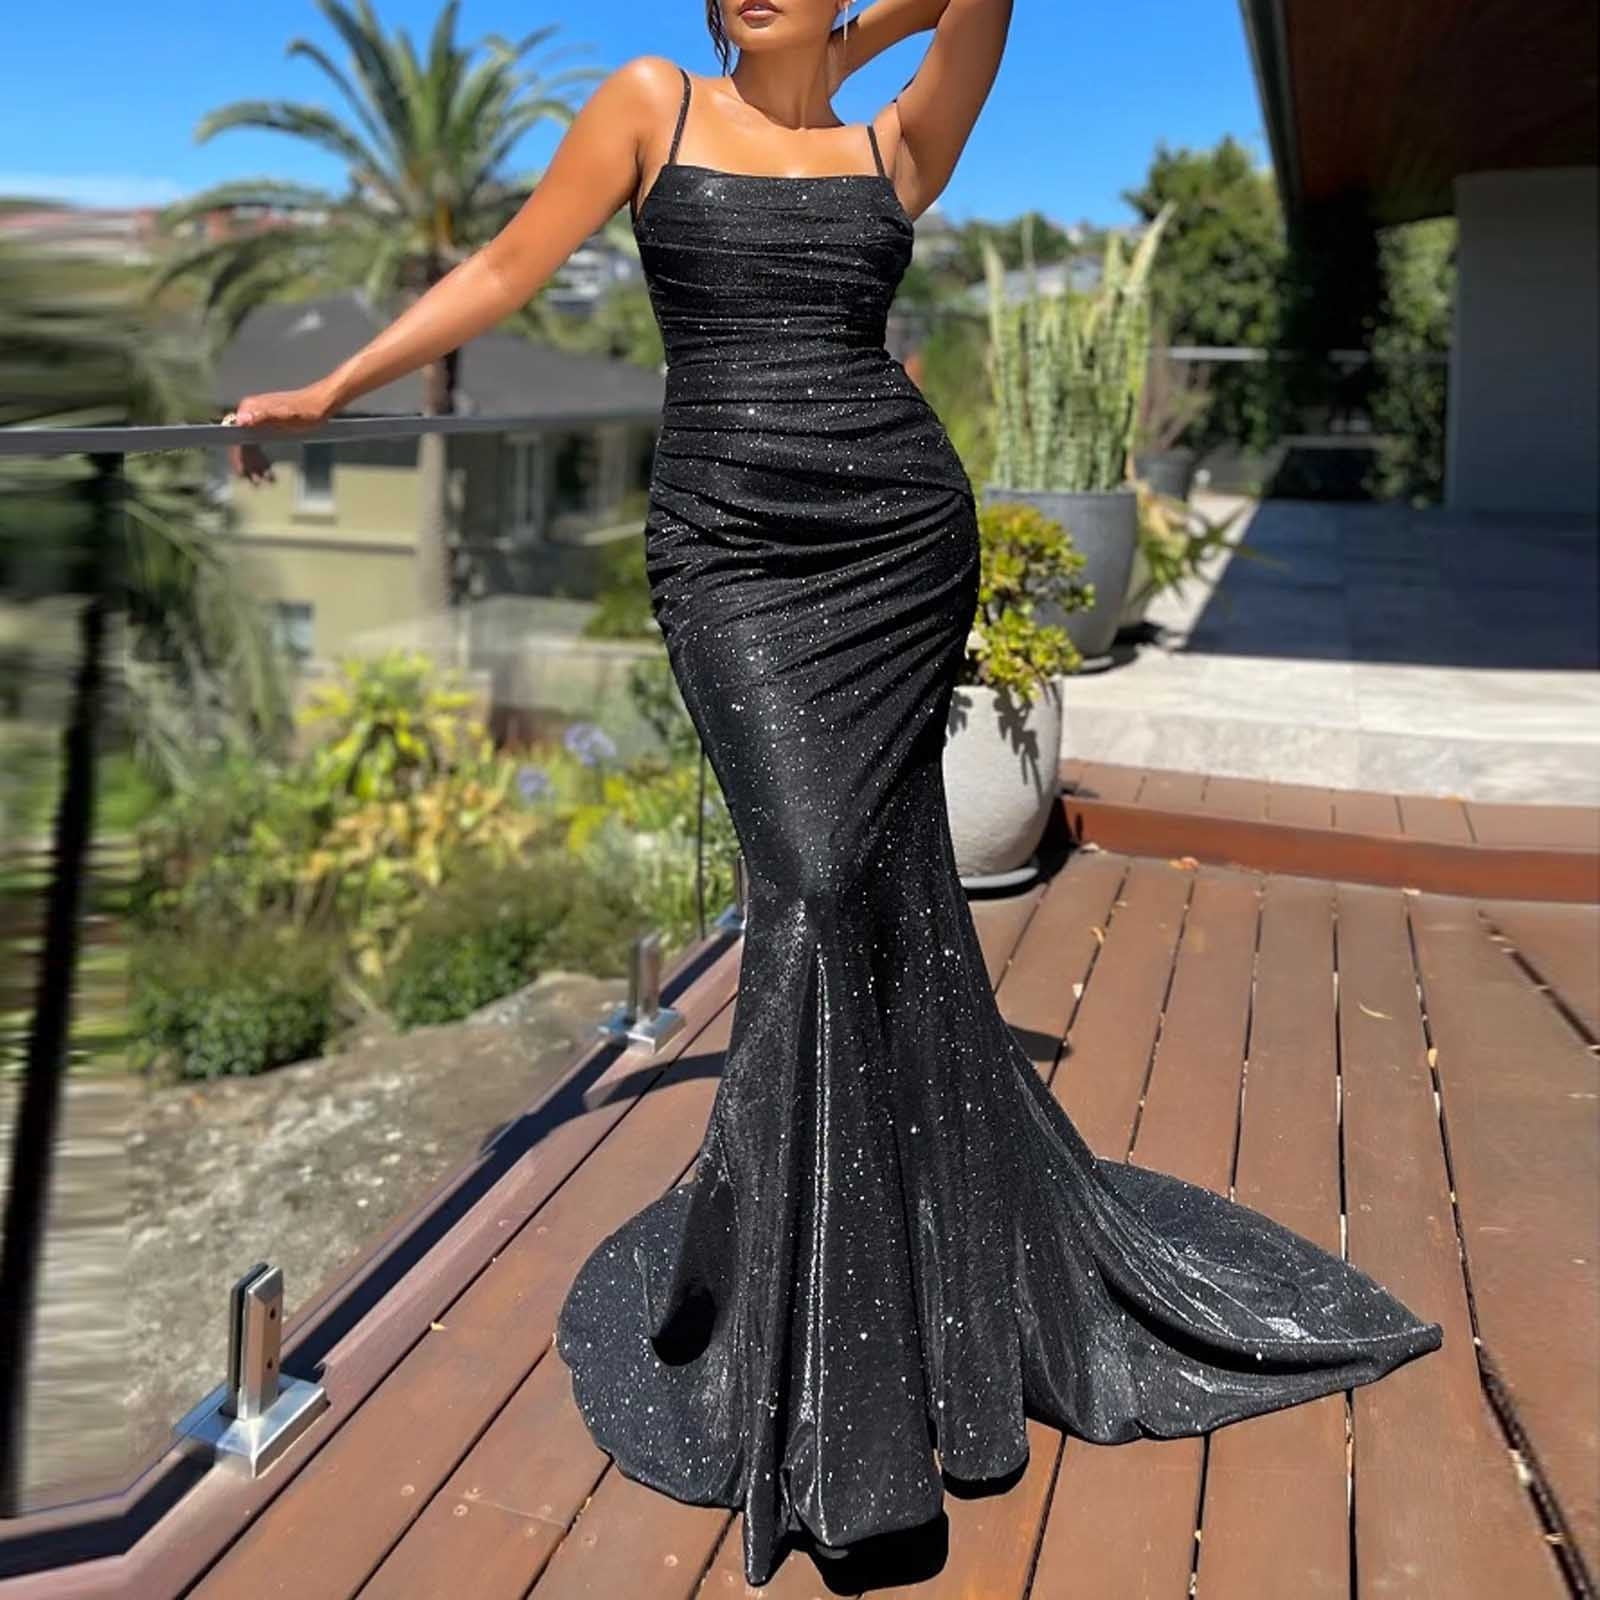 Burgundy Lace Mermaid Blue Sequin Prom Dress With Sequins And Sexy Slit  2020 Formal Evening Gown From Weddingshop888, $51.87 | DHgate.Com